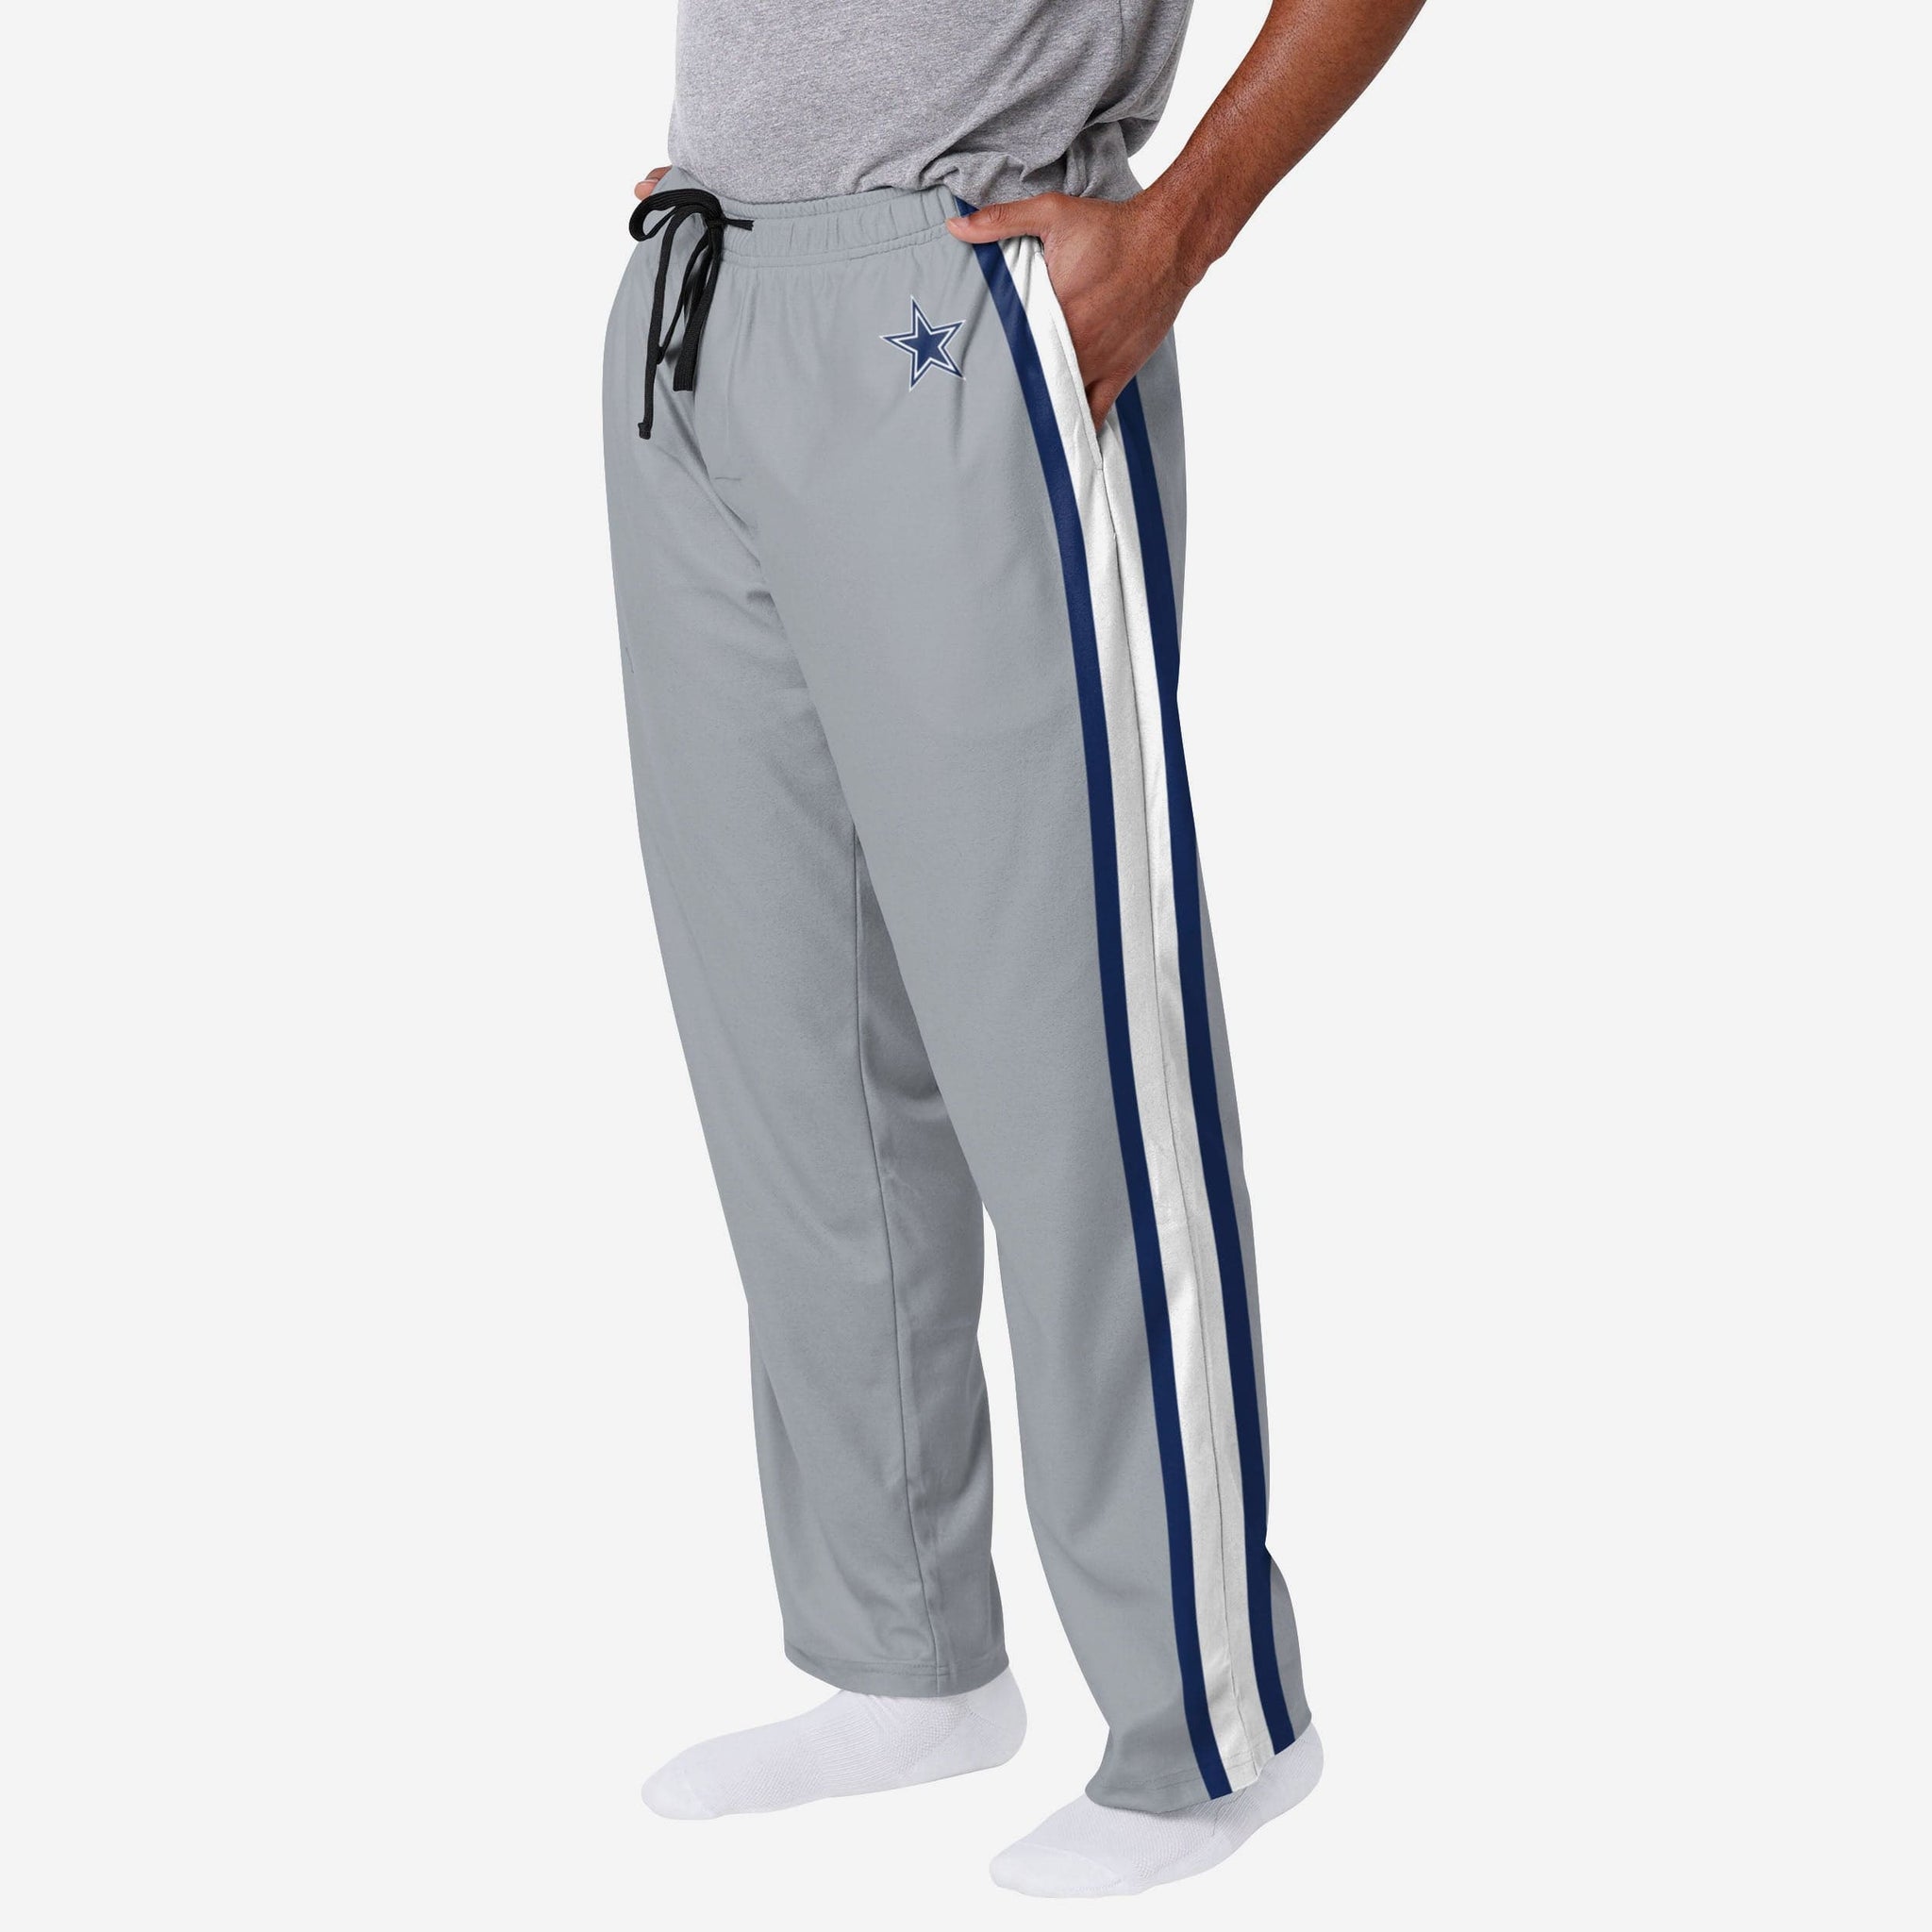 NBA Logo Baggy Track Pants In Black - FREE* Shipping & Easy Returns - City  Beach United States